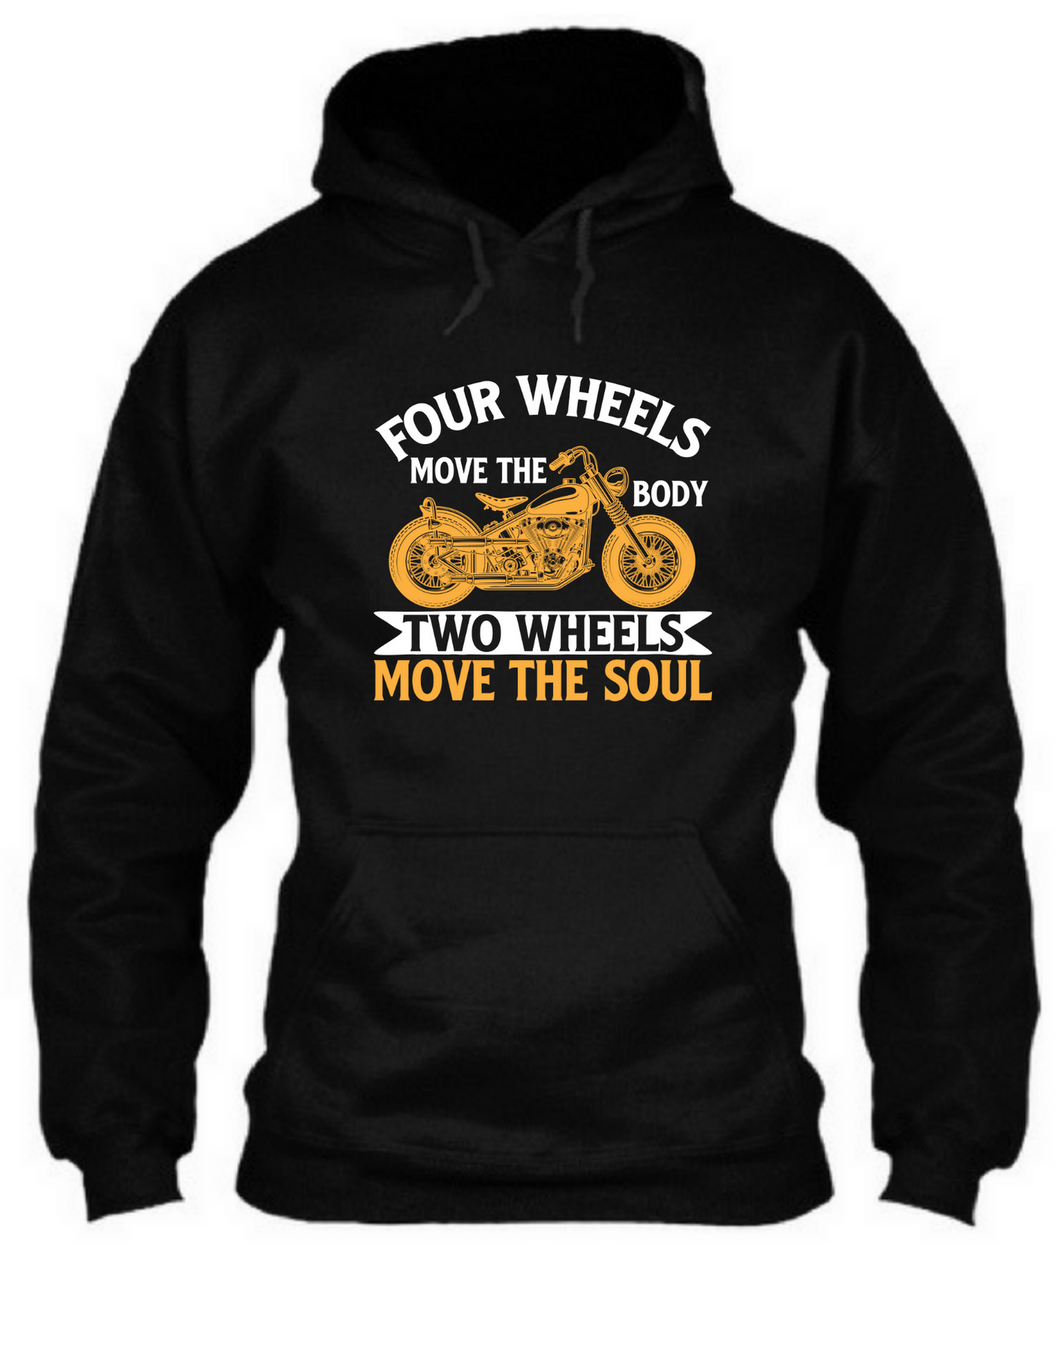 Four wheels move the body two wheels move the soul - Unisex Hoodie